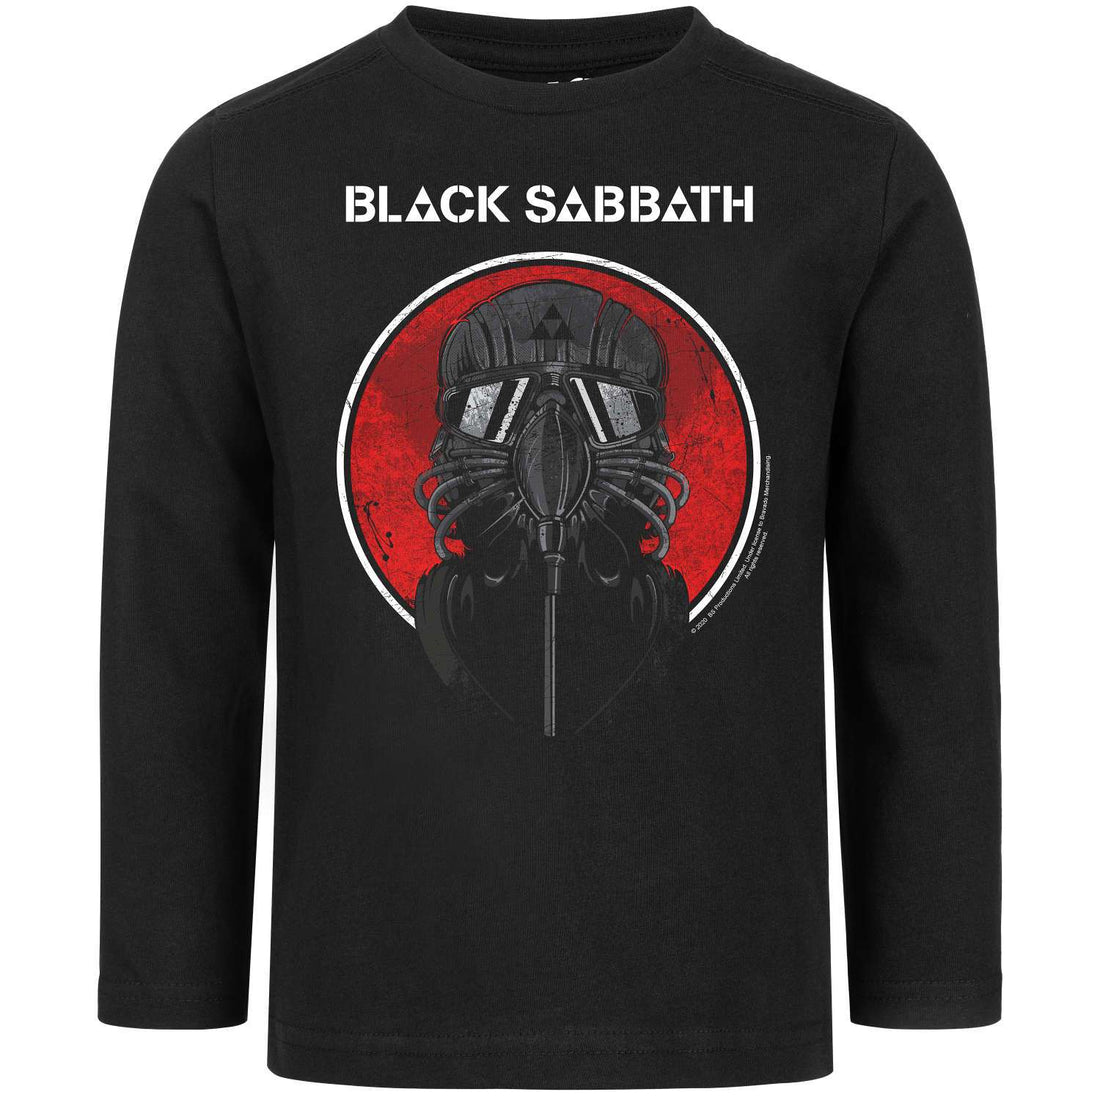 These new Ozzy and Black Sabbath Kids Tees are essential for any mini-rocker!